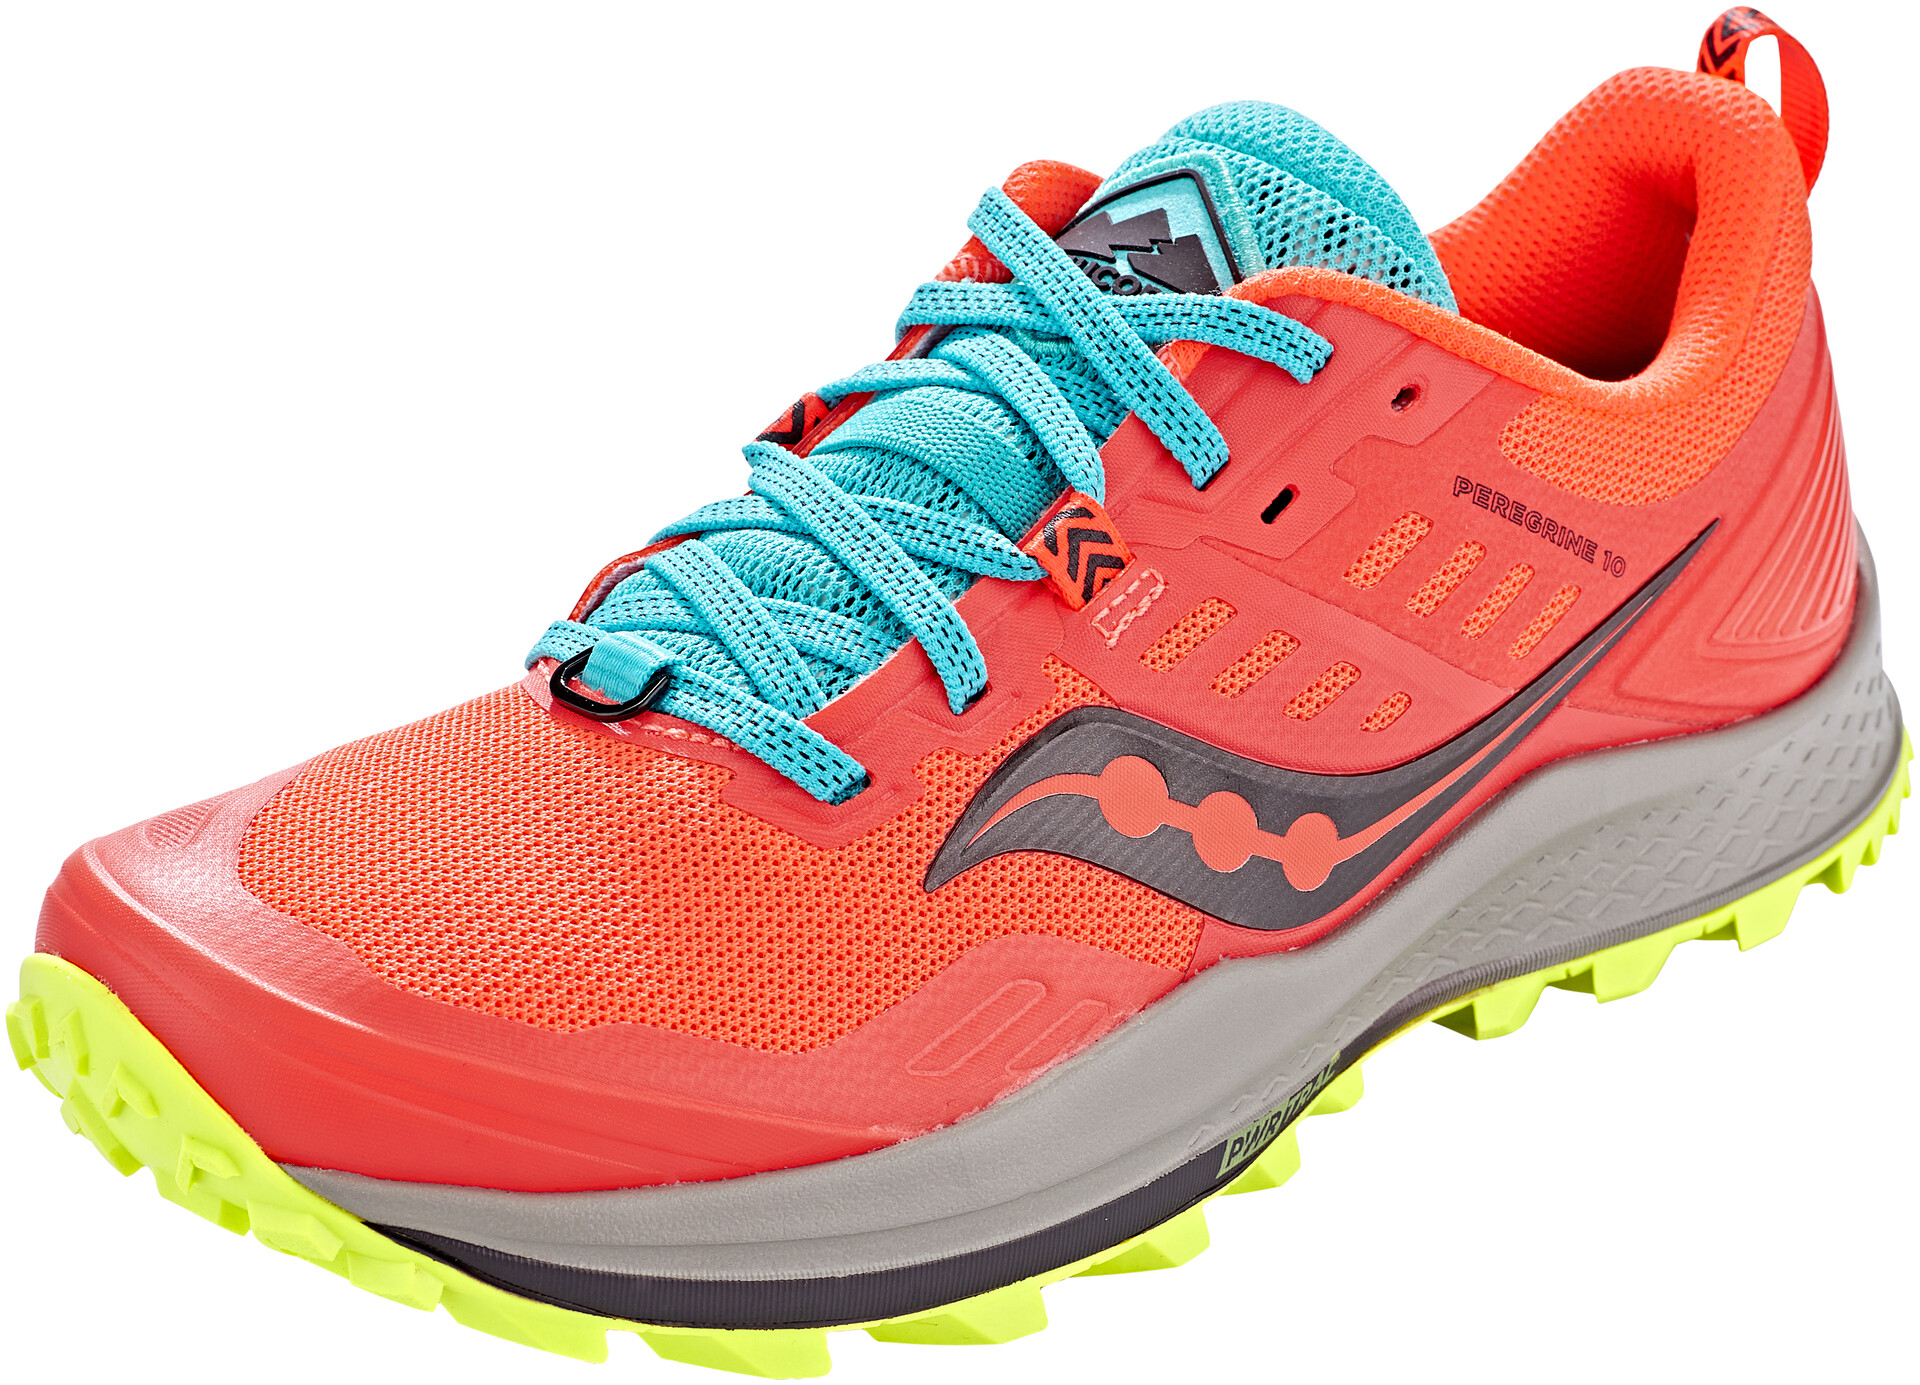 saucony femme chaussure